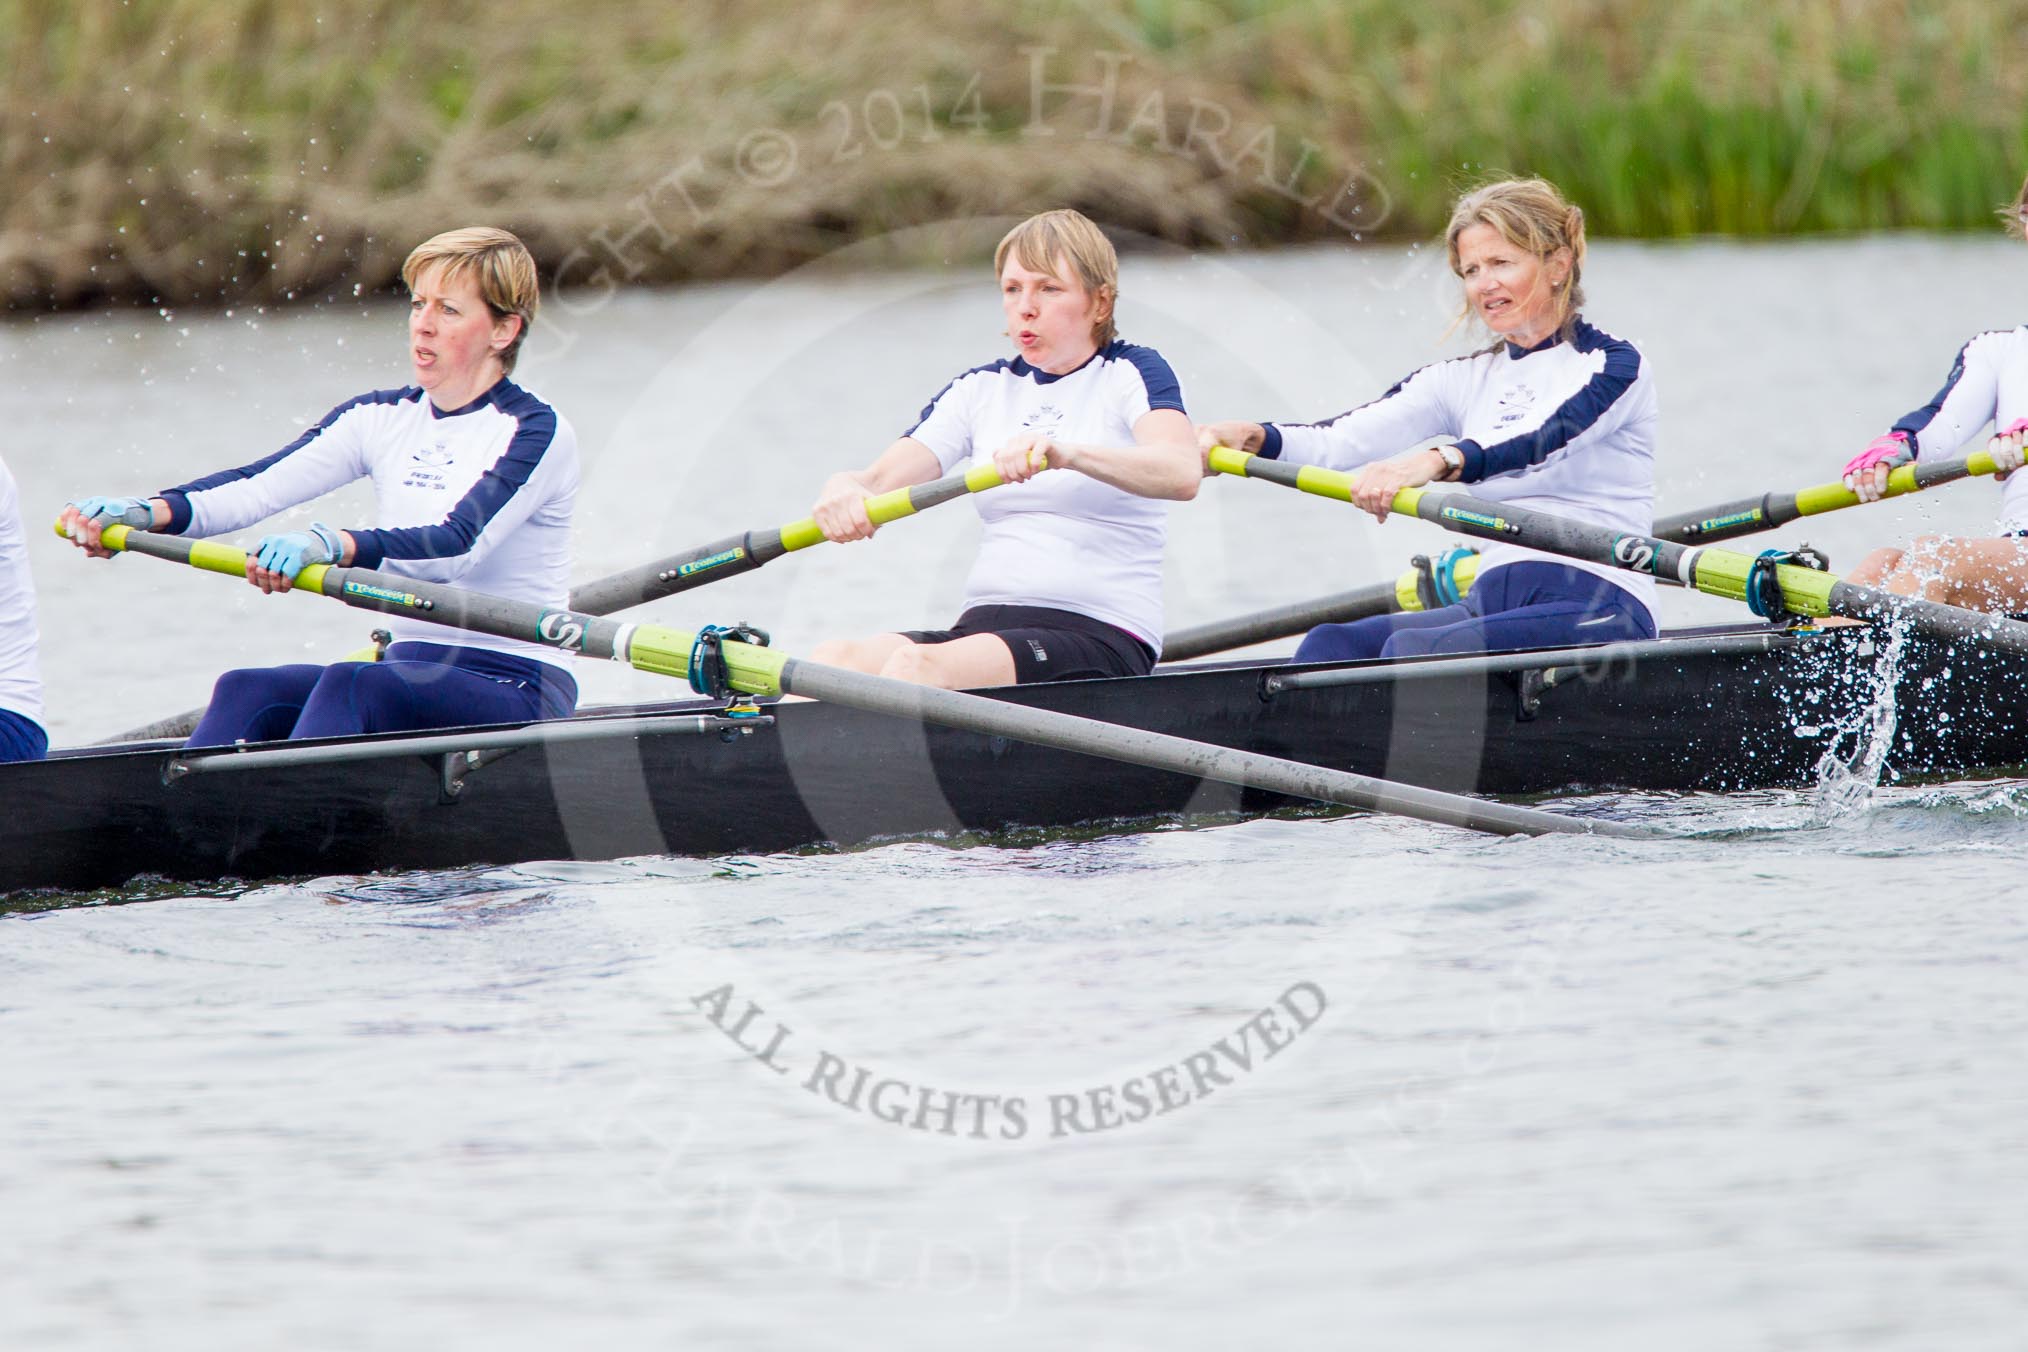 The Women's Boat Race and Henley Boat Races 2014: The Commemorative Row Past of the 1984 inaugural crews of the Oxford and Cambridge Women’s Lightweight races, to celebrate 30 years at Henley: In the OUWBC boat stroke Alison Salvesen, 7 Diana Mountain, 6 Susannah Pulhams (Knight), 5 Ali Johansen (Blythe-Brook)..
River Thames,
Henley-on-Thames,
Buckinghamshire,
United Kingdom,
on 30 March 2014 at 15:55, image #455